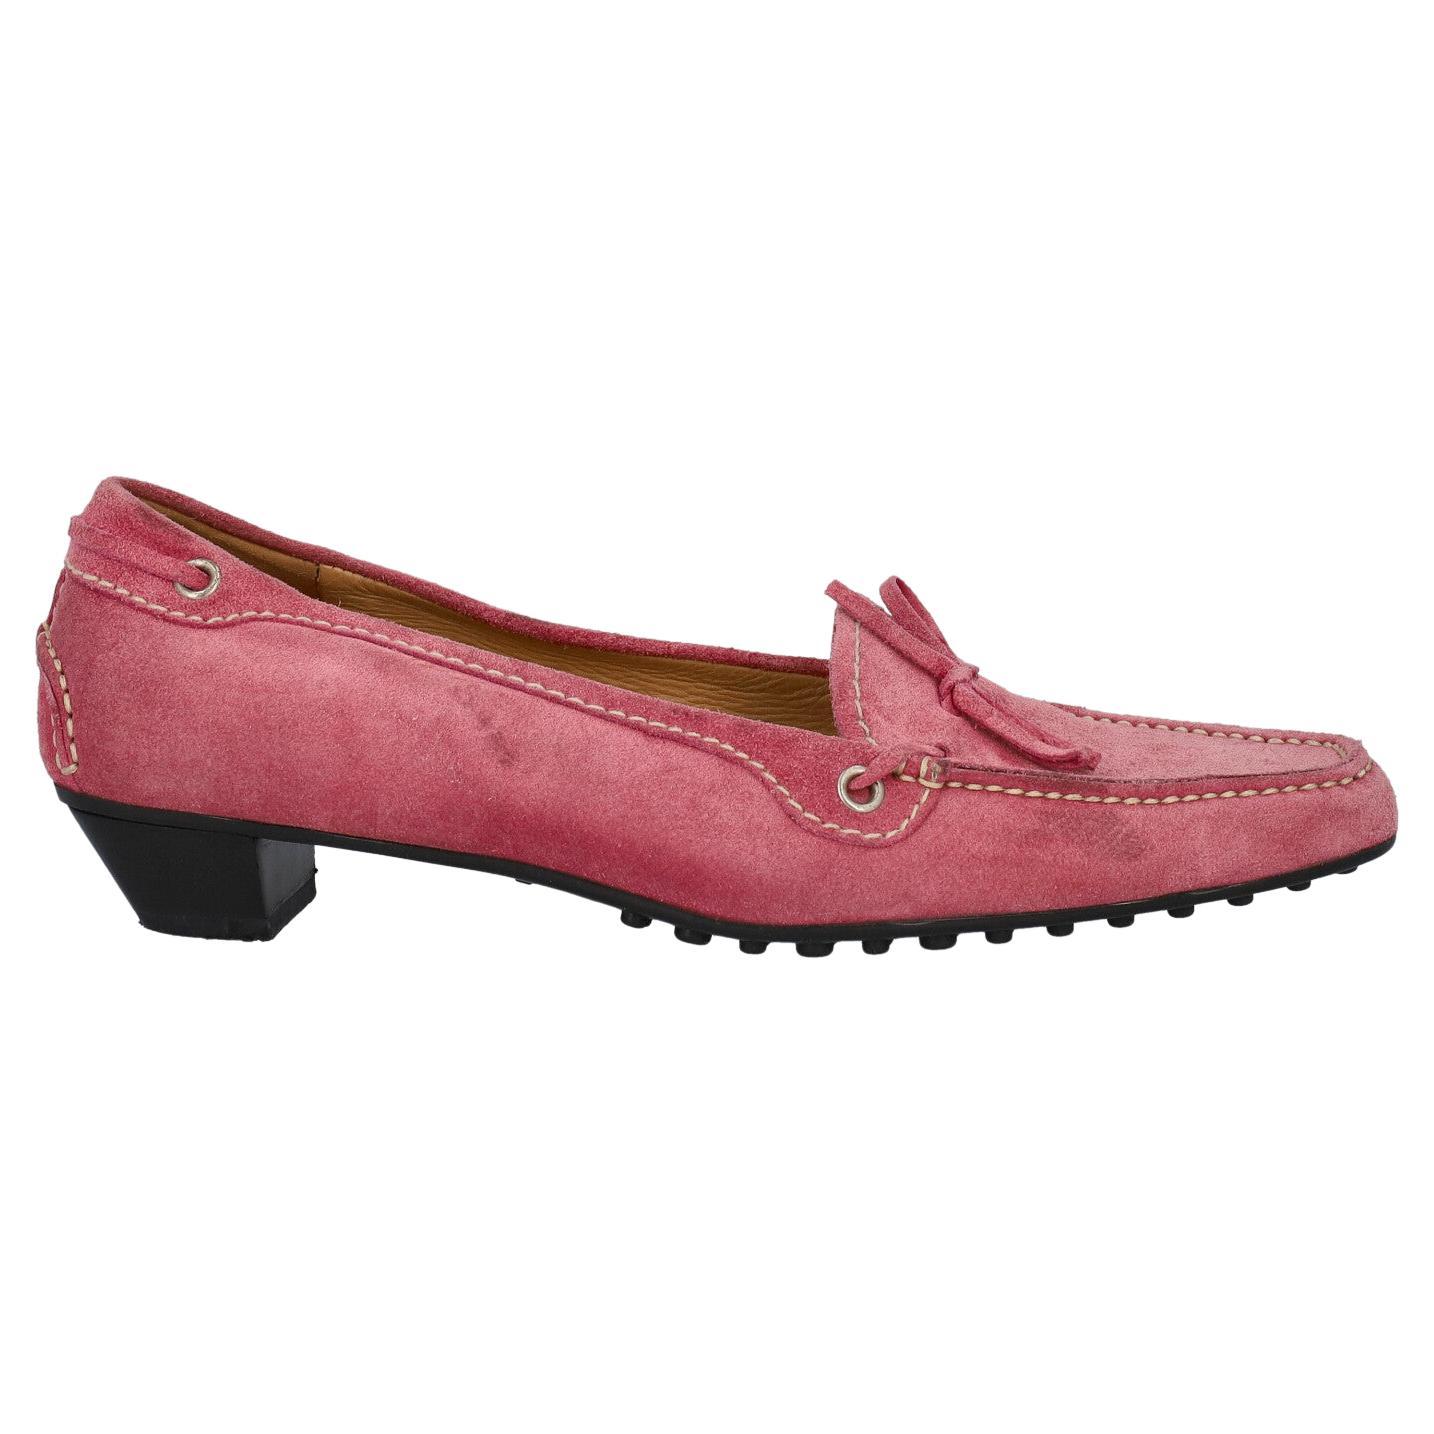 Car Shoe Women Loafers Pink Leather EU 37 For Sale